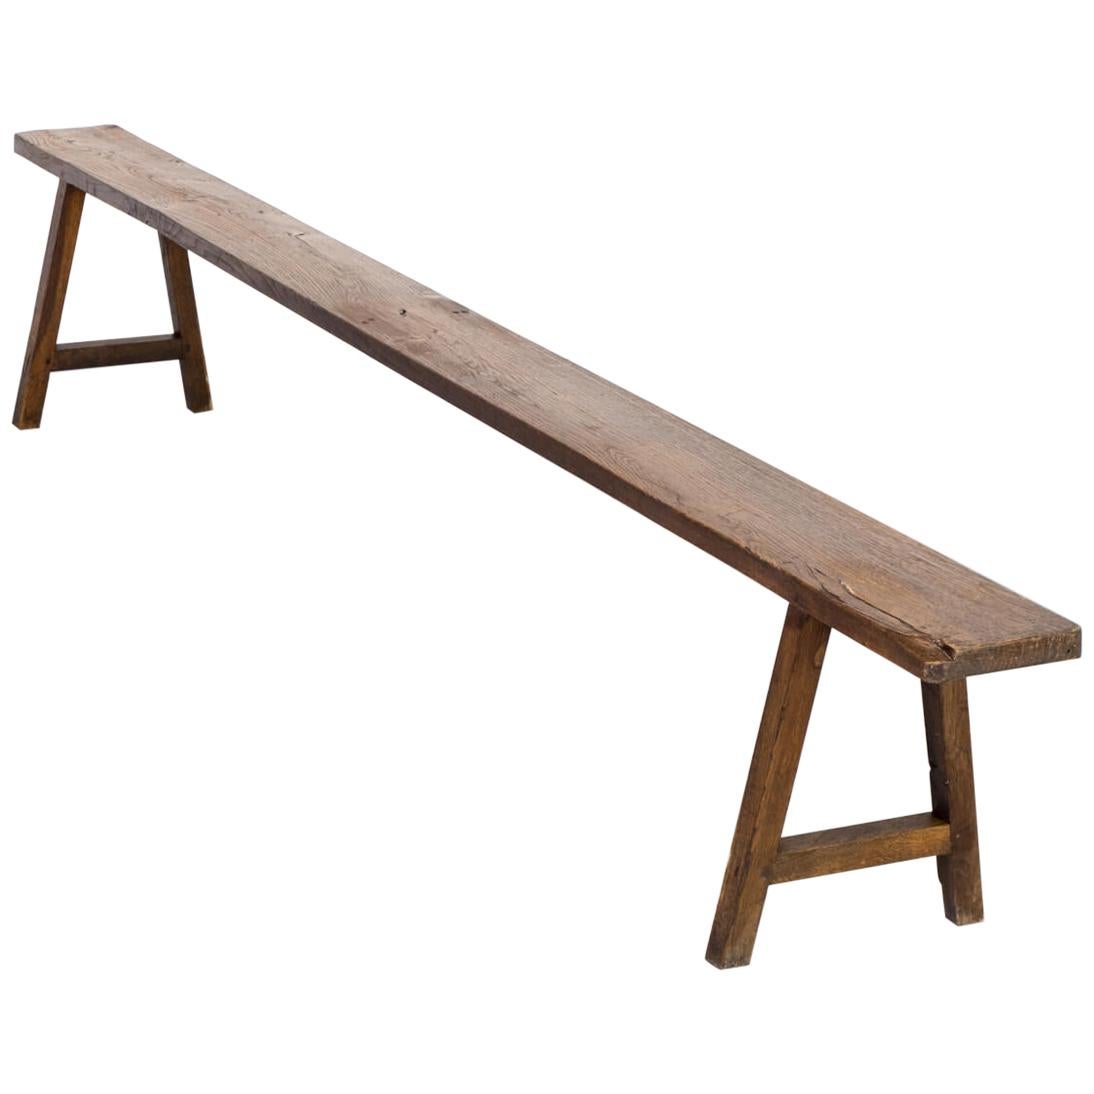 1950s Organic Shaped Wooden French Bench